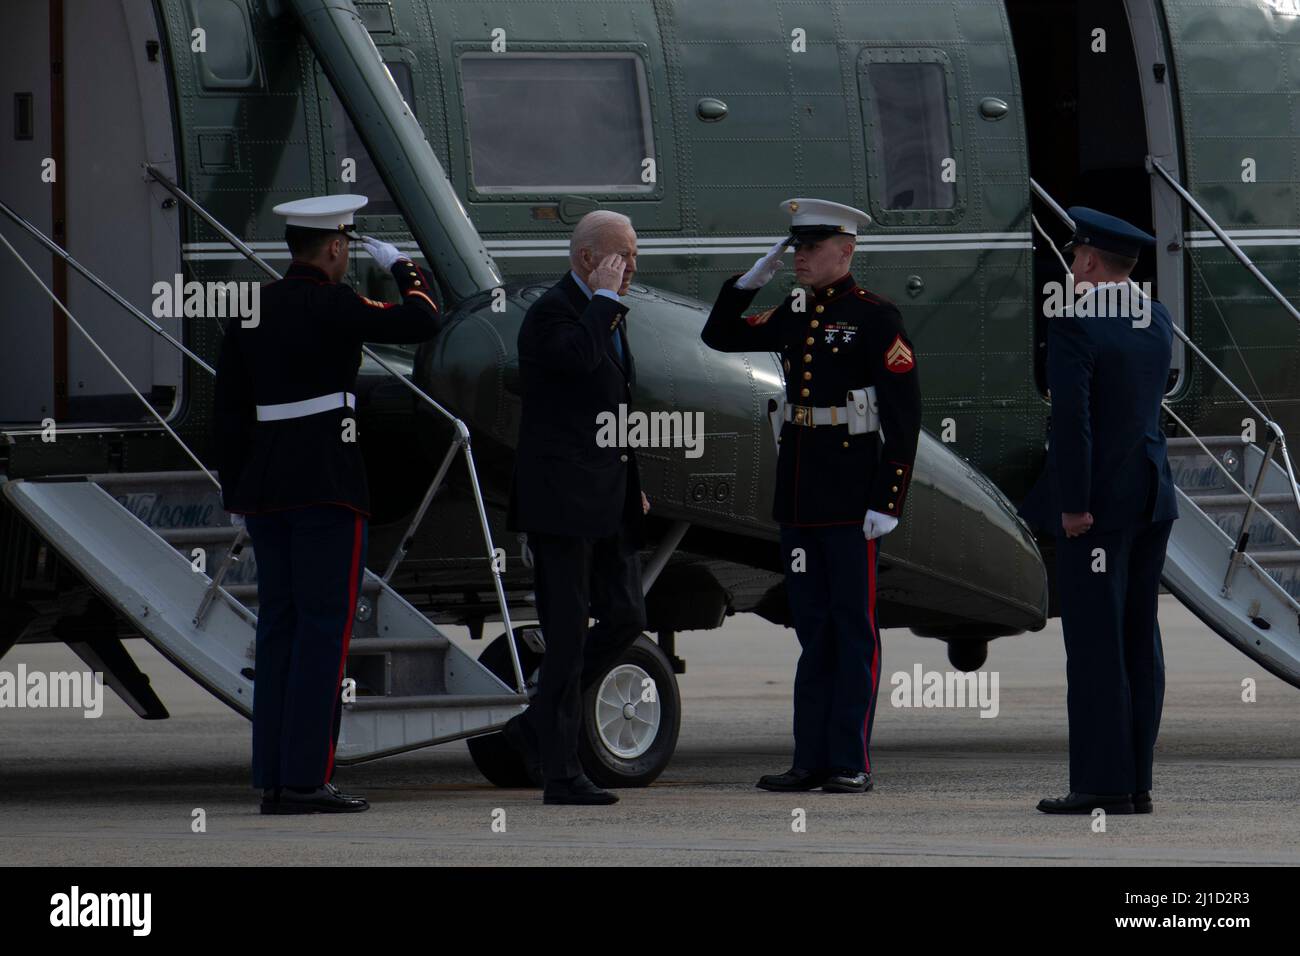 U.S. President Joe Biden disembarks Marine One and is met by U.S. Air Force Col. Matthew Jones commander, 89th Airlift Wing at Joint Base Andrews, Md., March 23, 2022, prior to boarding Air Force One for his trip to Europe. (U.S. Air Force photo by Staff Sgt. Jason Huddleston) Stock Photo